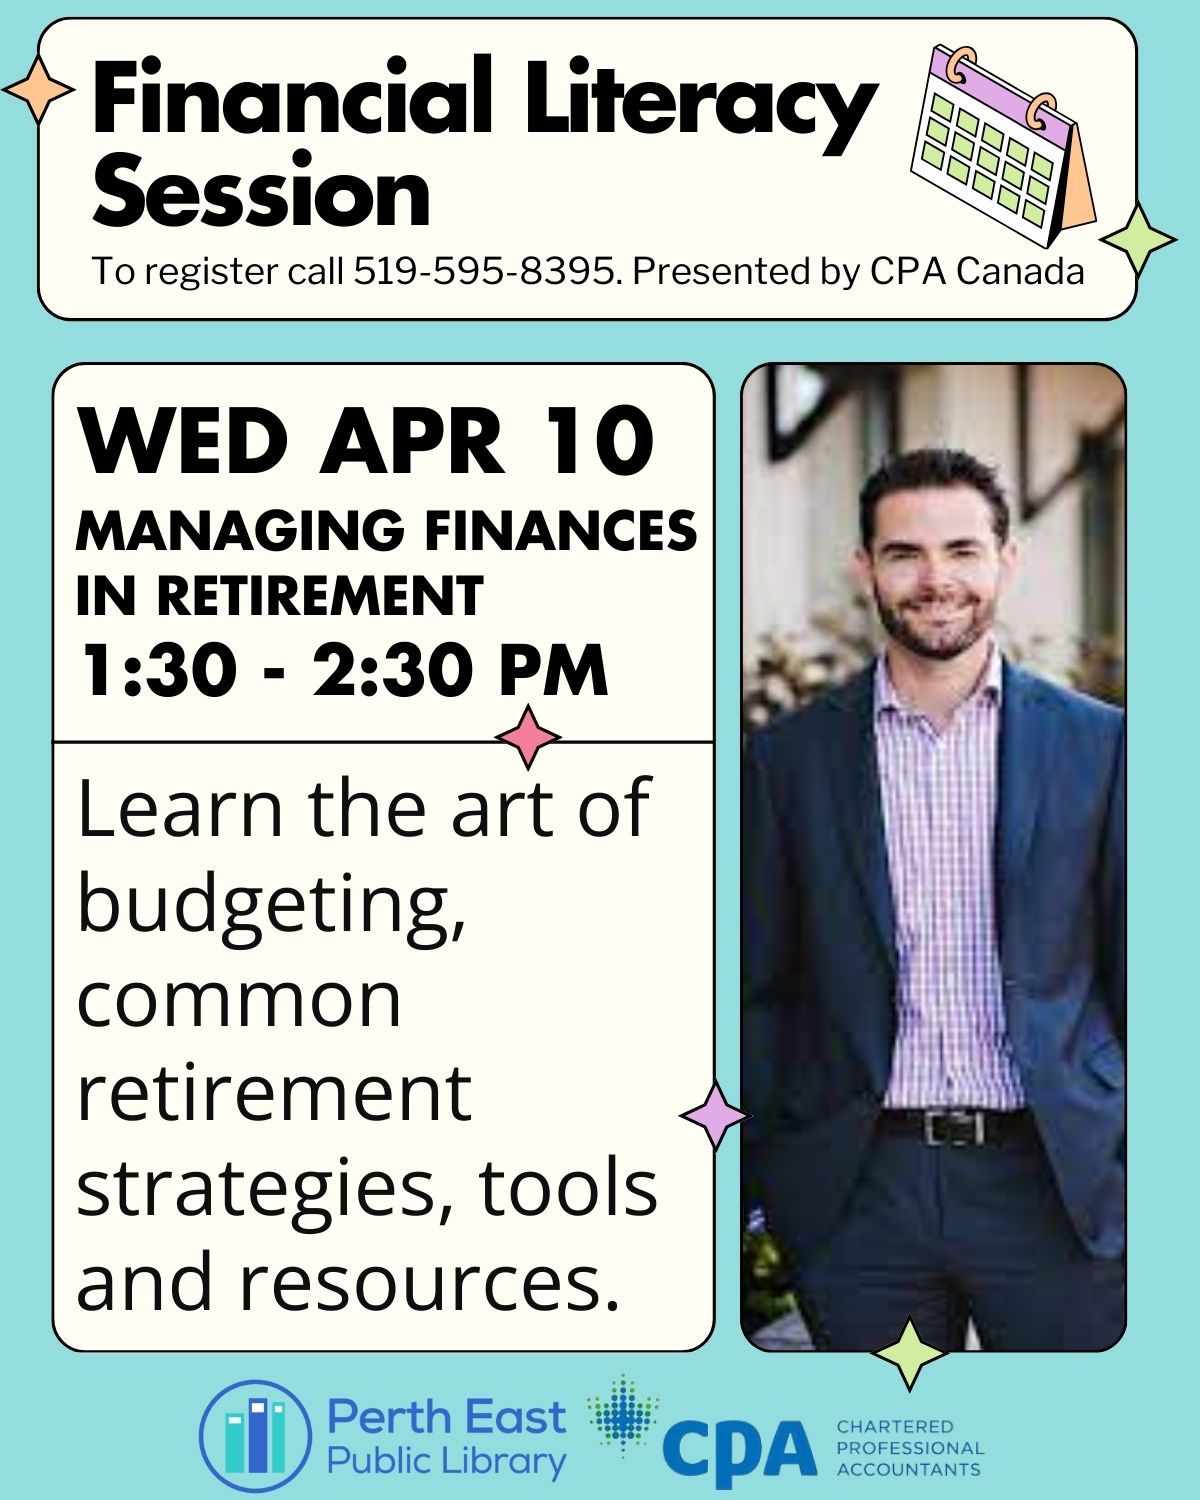 Managing Finances in Retirement - Graphic includes image of Luke MacLennan, the speaker for the program